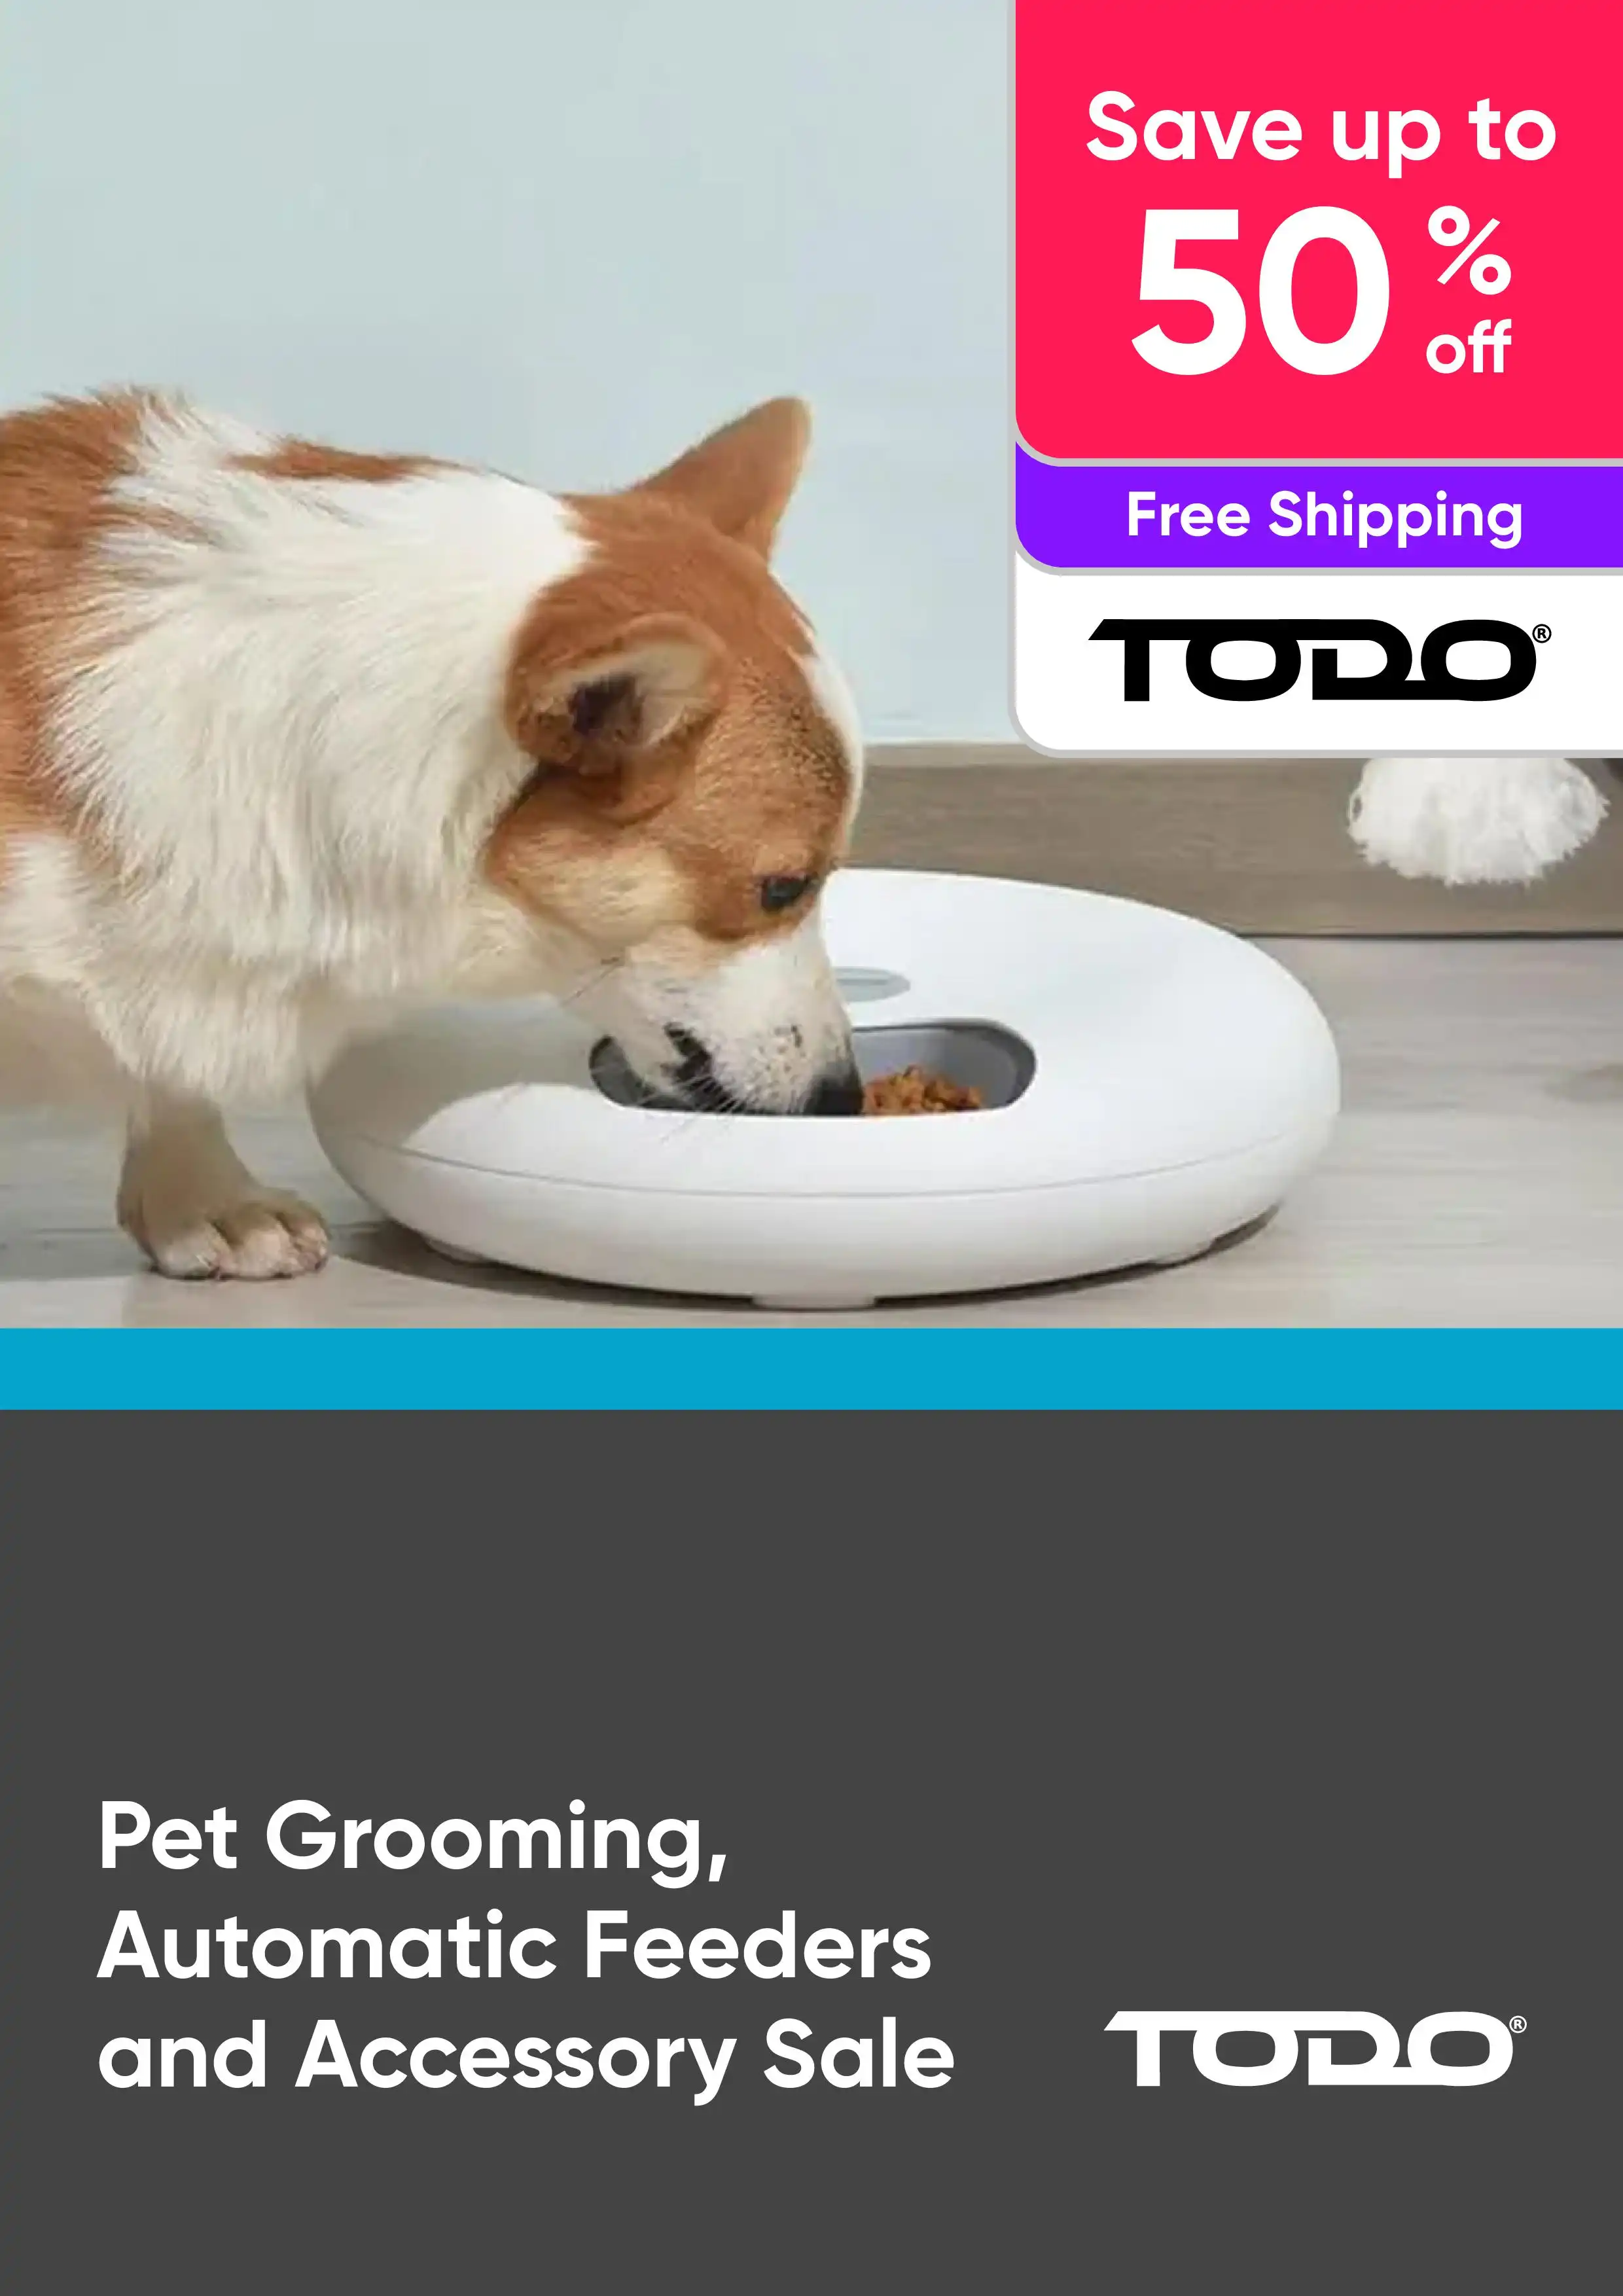 Pet Grooming, Automatic Feeders and Accessory Sale - Clippers, Automatic Pet feeders and More - Up to 50% Off